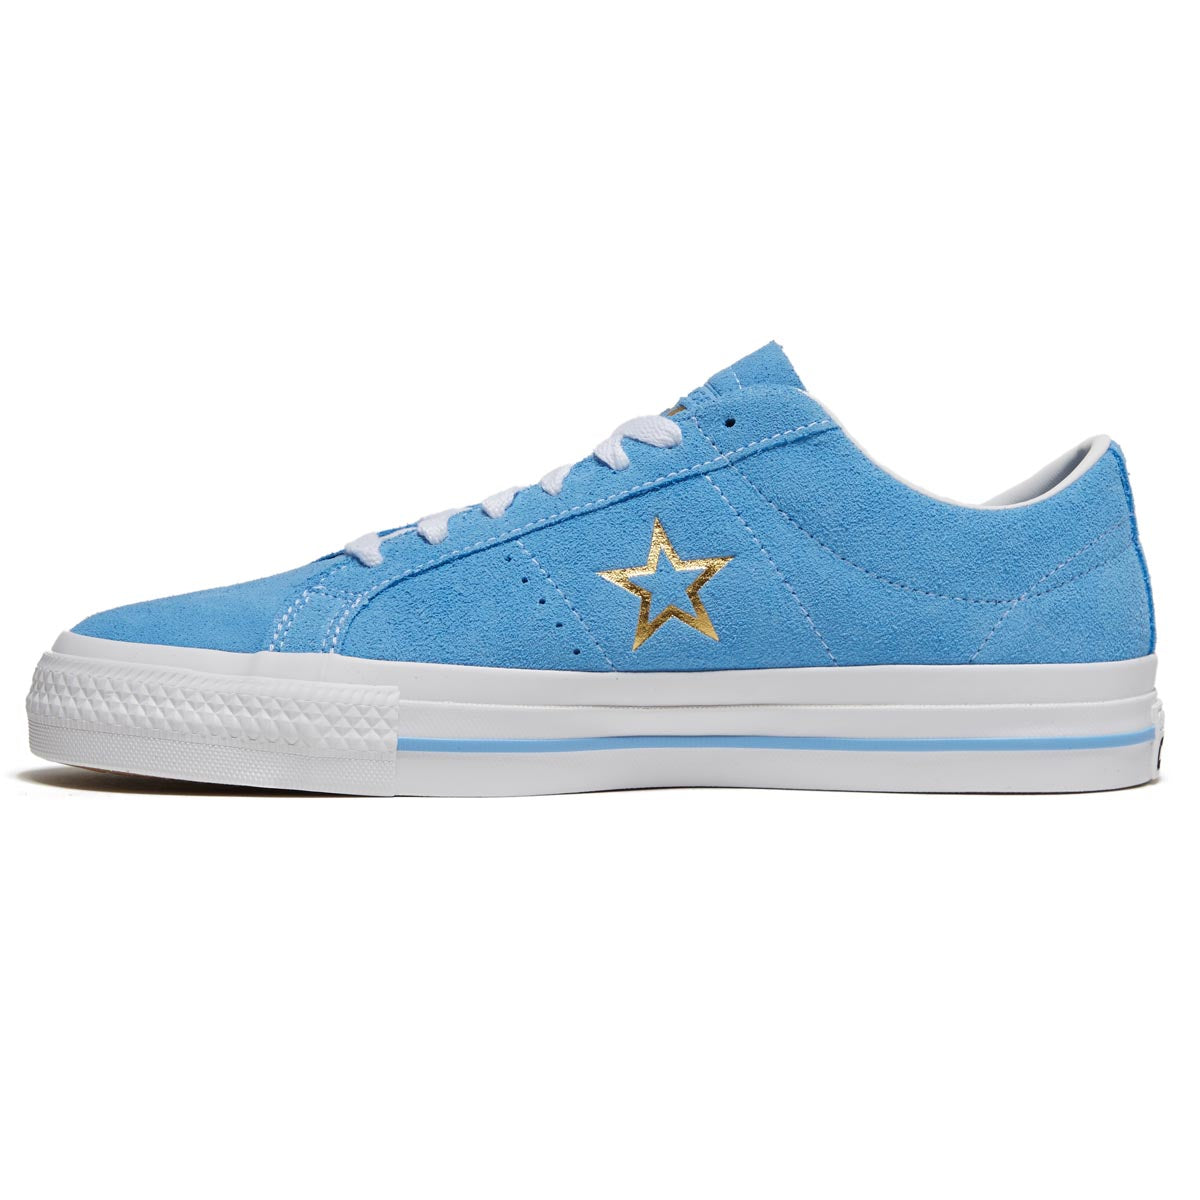 Converse One Star Pro Suede Ox Shoes - Light Blue/White/Gold image 2